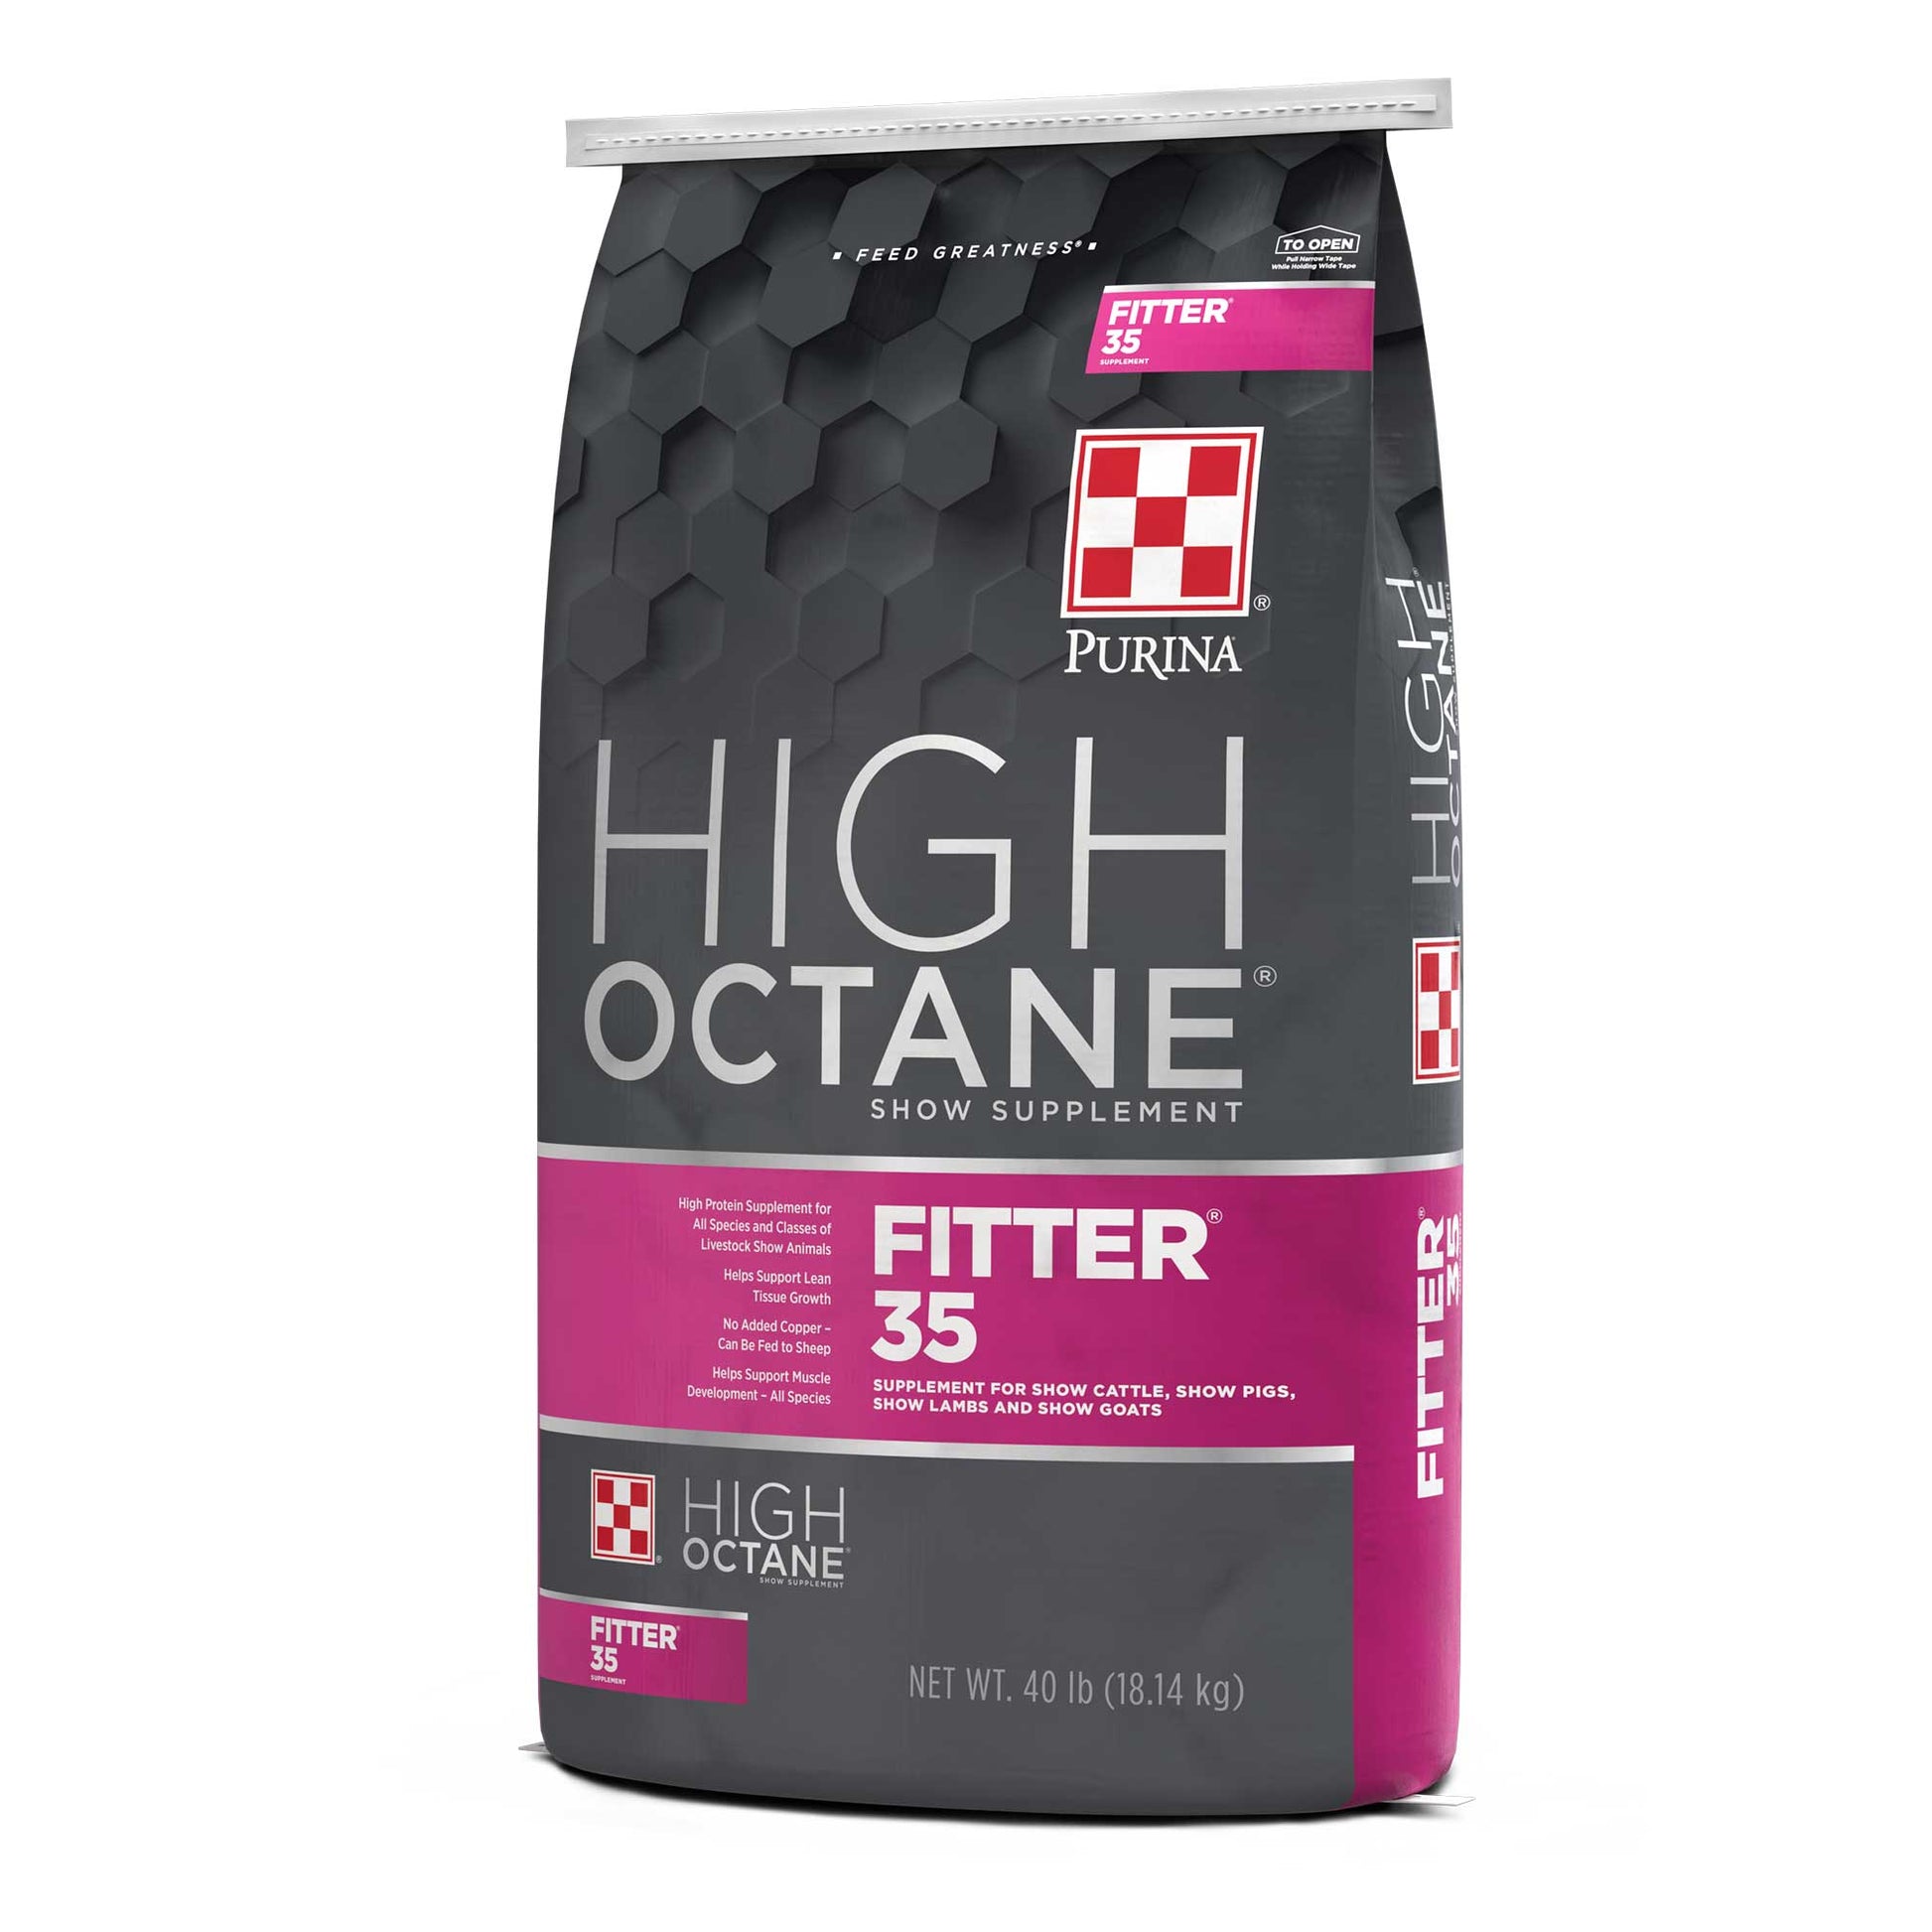 Right Angle of Purina High Octane Fitter 35 40 Pound Bag